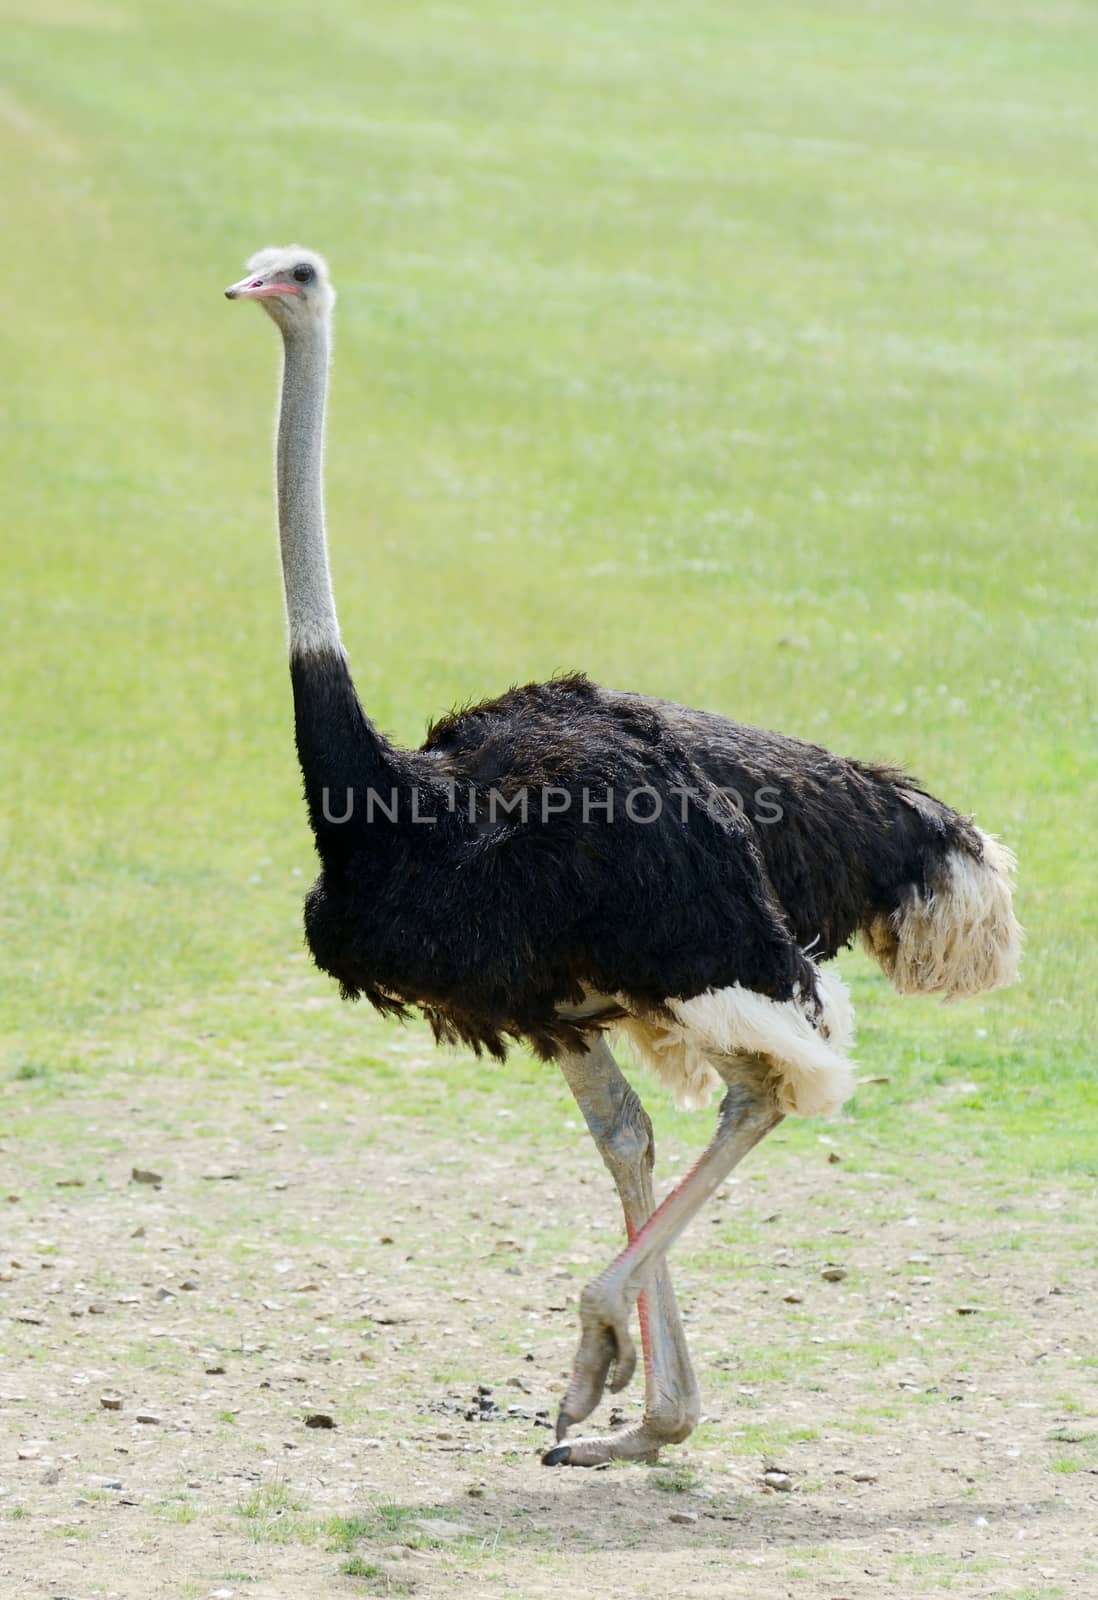 A lone ostrich walking on grassland on a sunny day